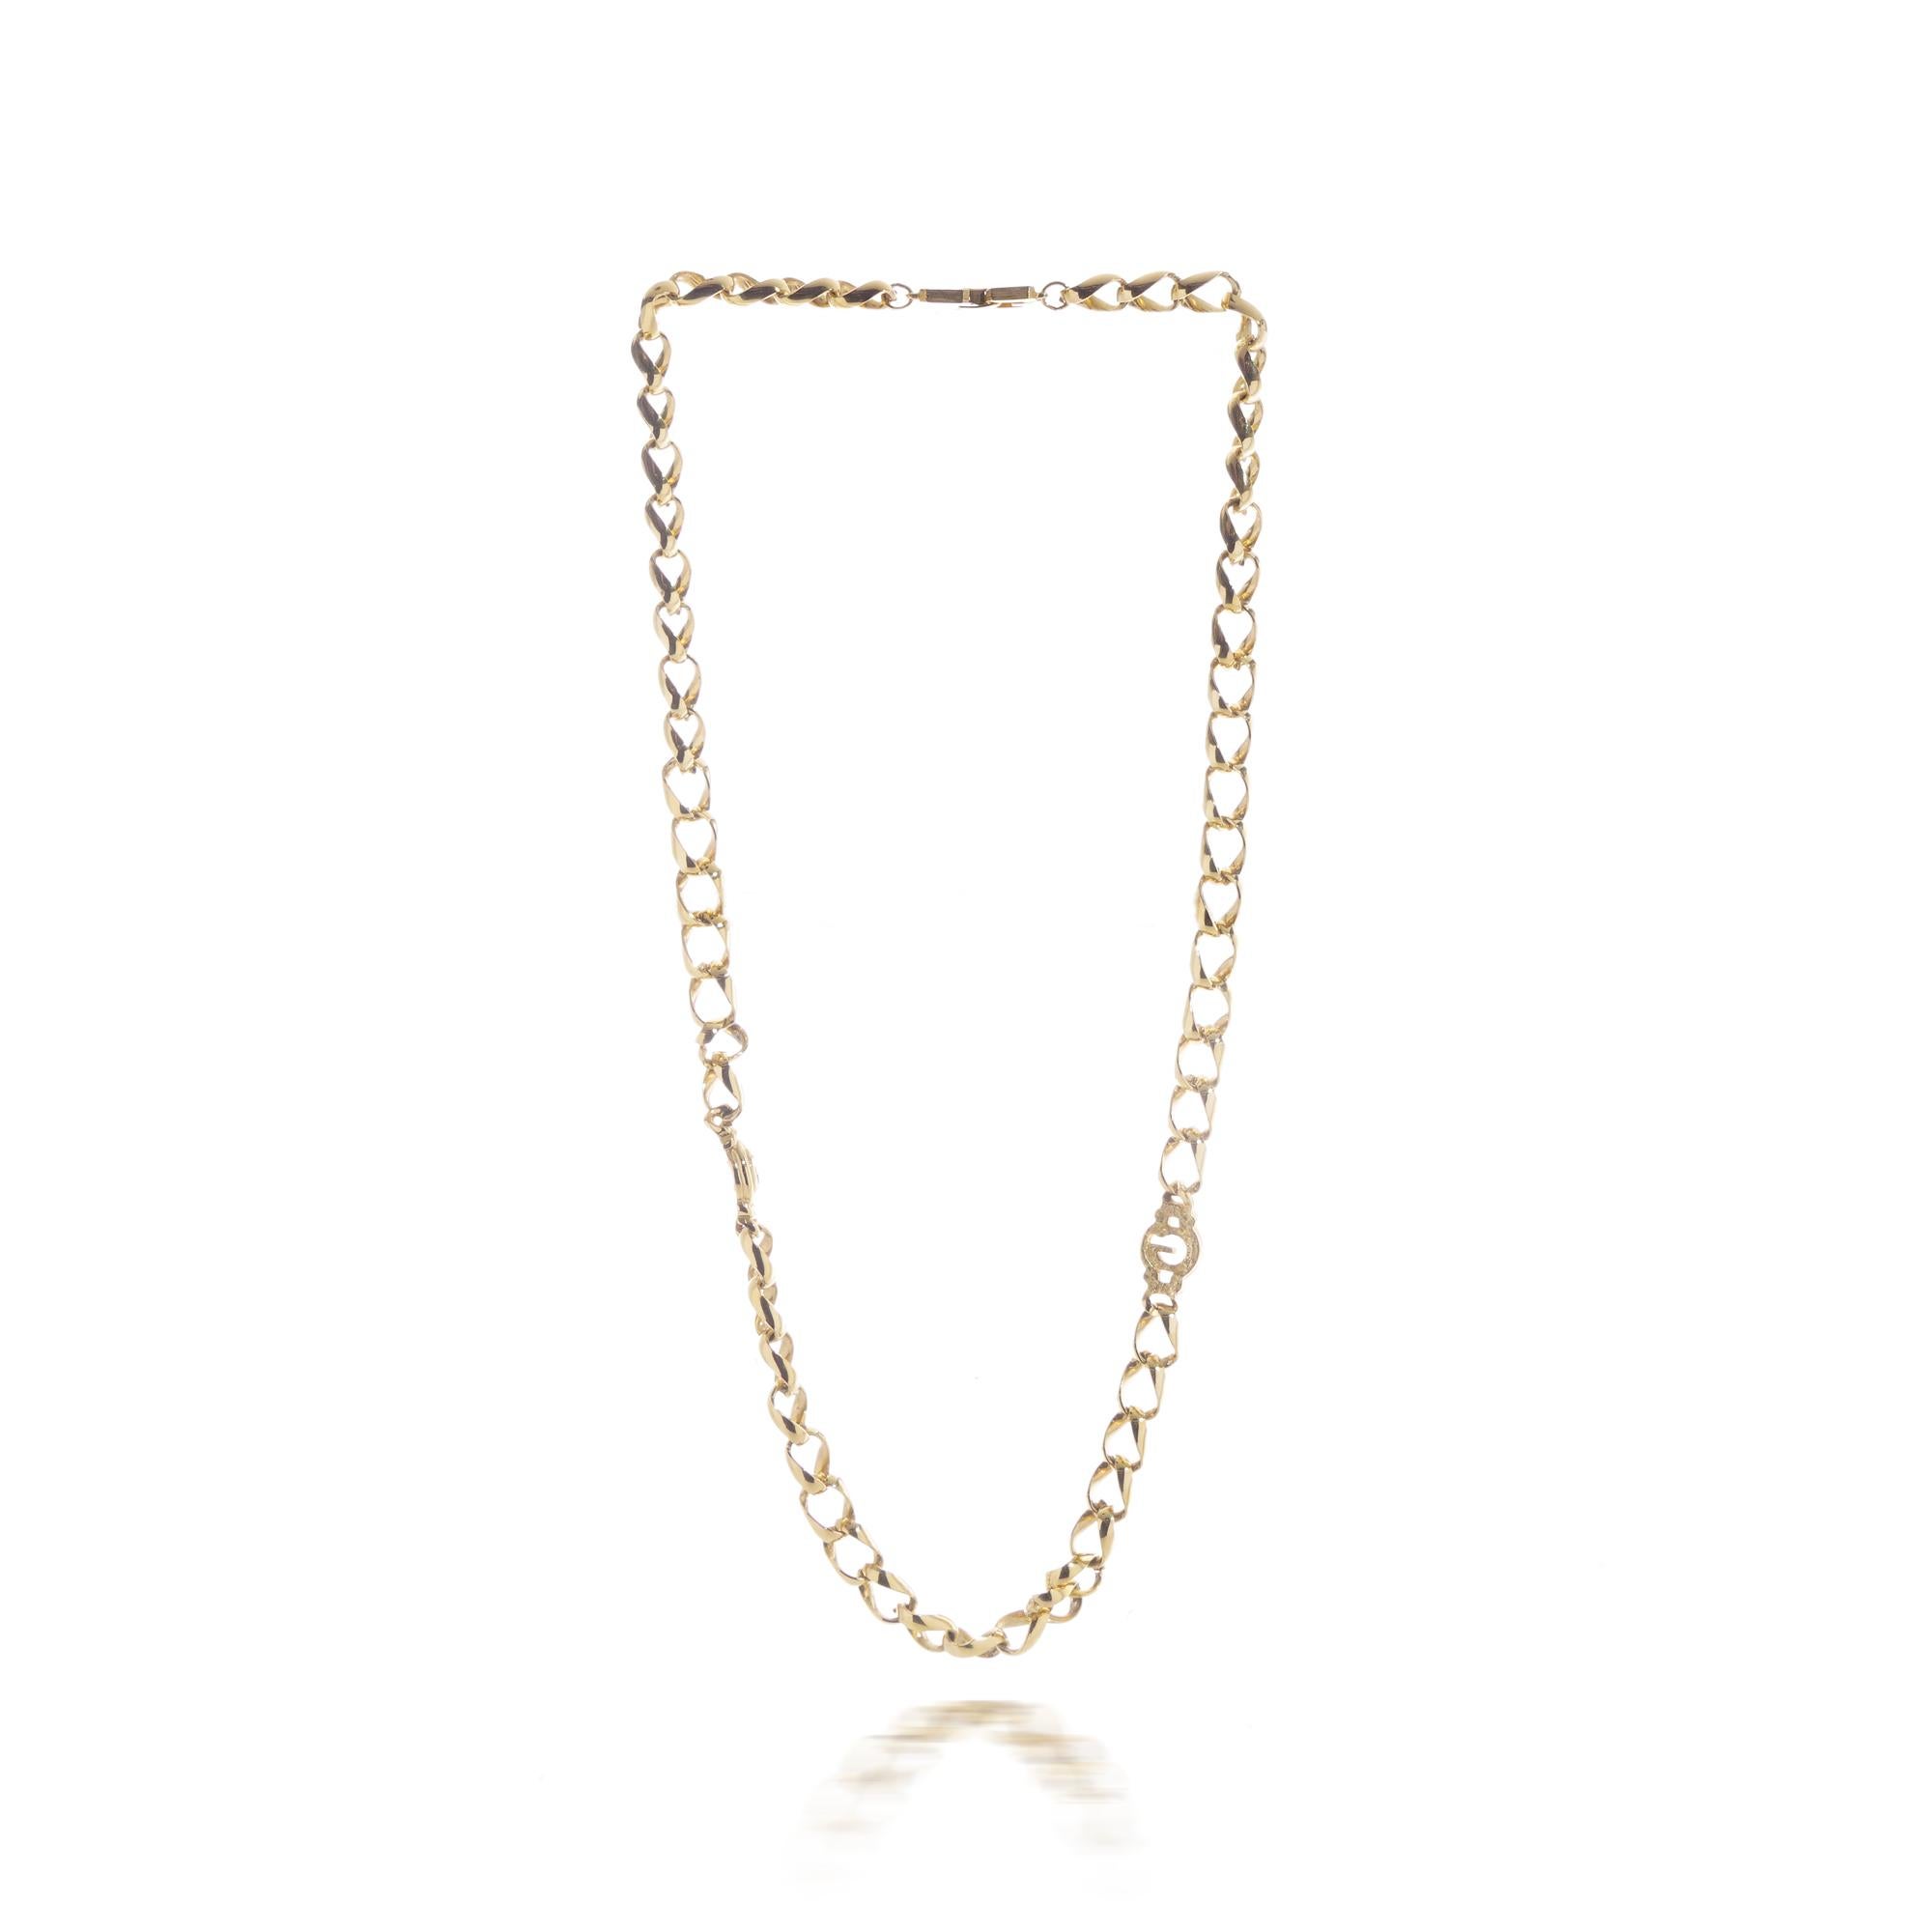 Vintage Givenchy long link chain necklace. 
Made in Circa 1990's 

Dimensions:
Weight: 58.2 grams
Length x width: 61 x 1 cm

Condition: Pre-owned, very good condition overall. 